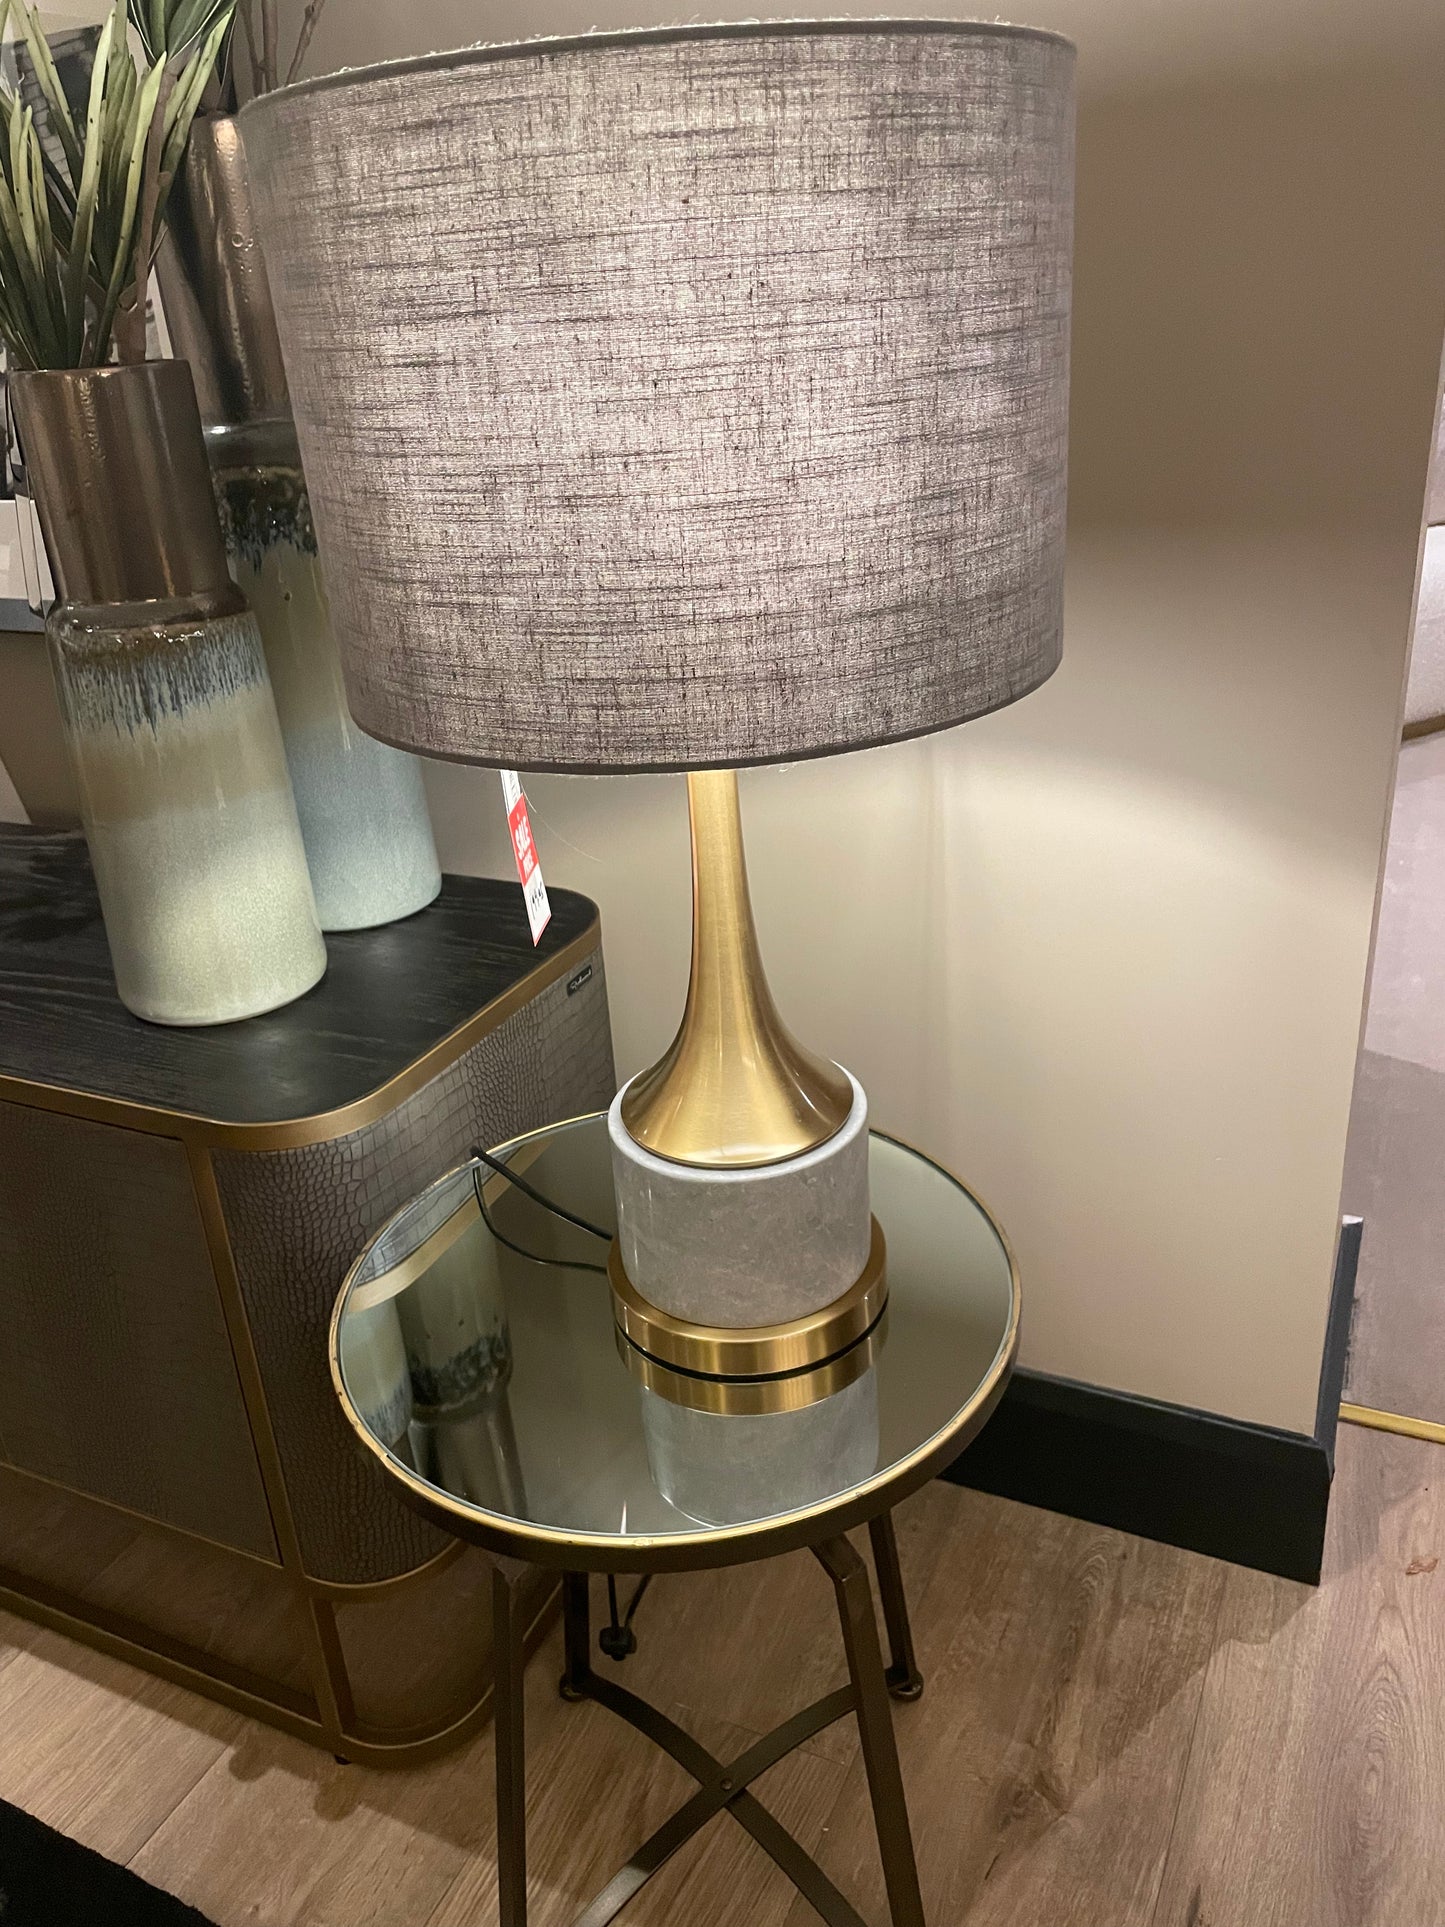 Garwin  table lamp SALE View and Purchase instore